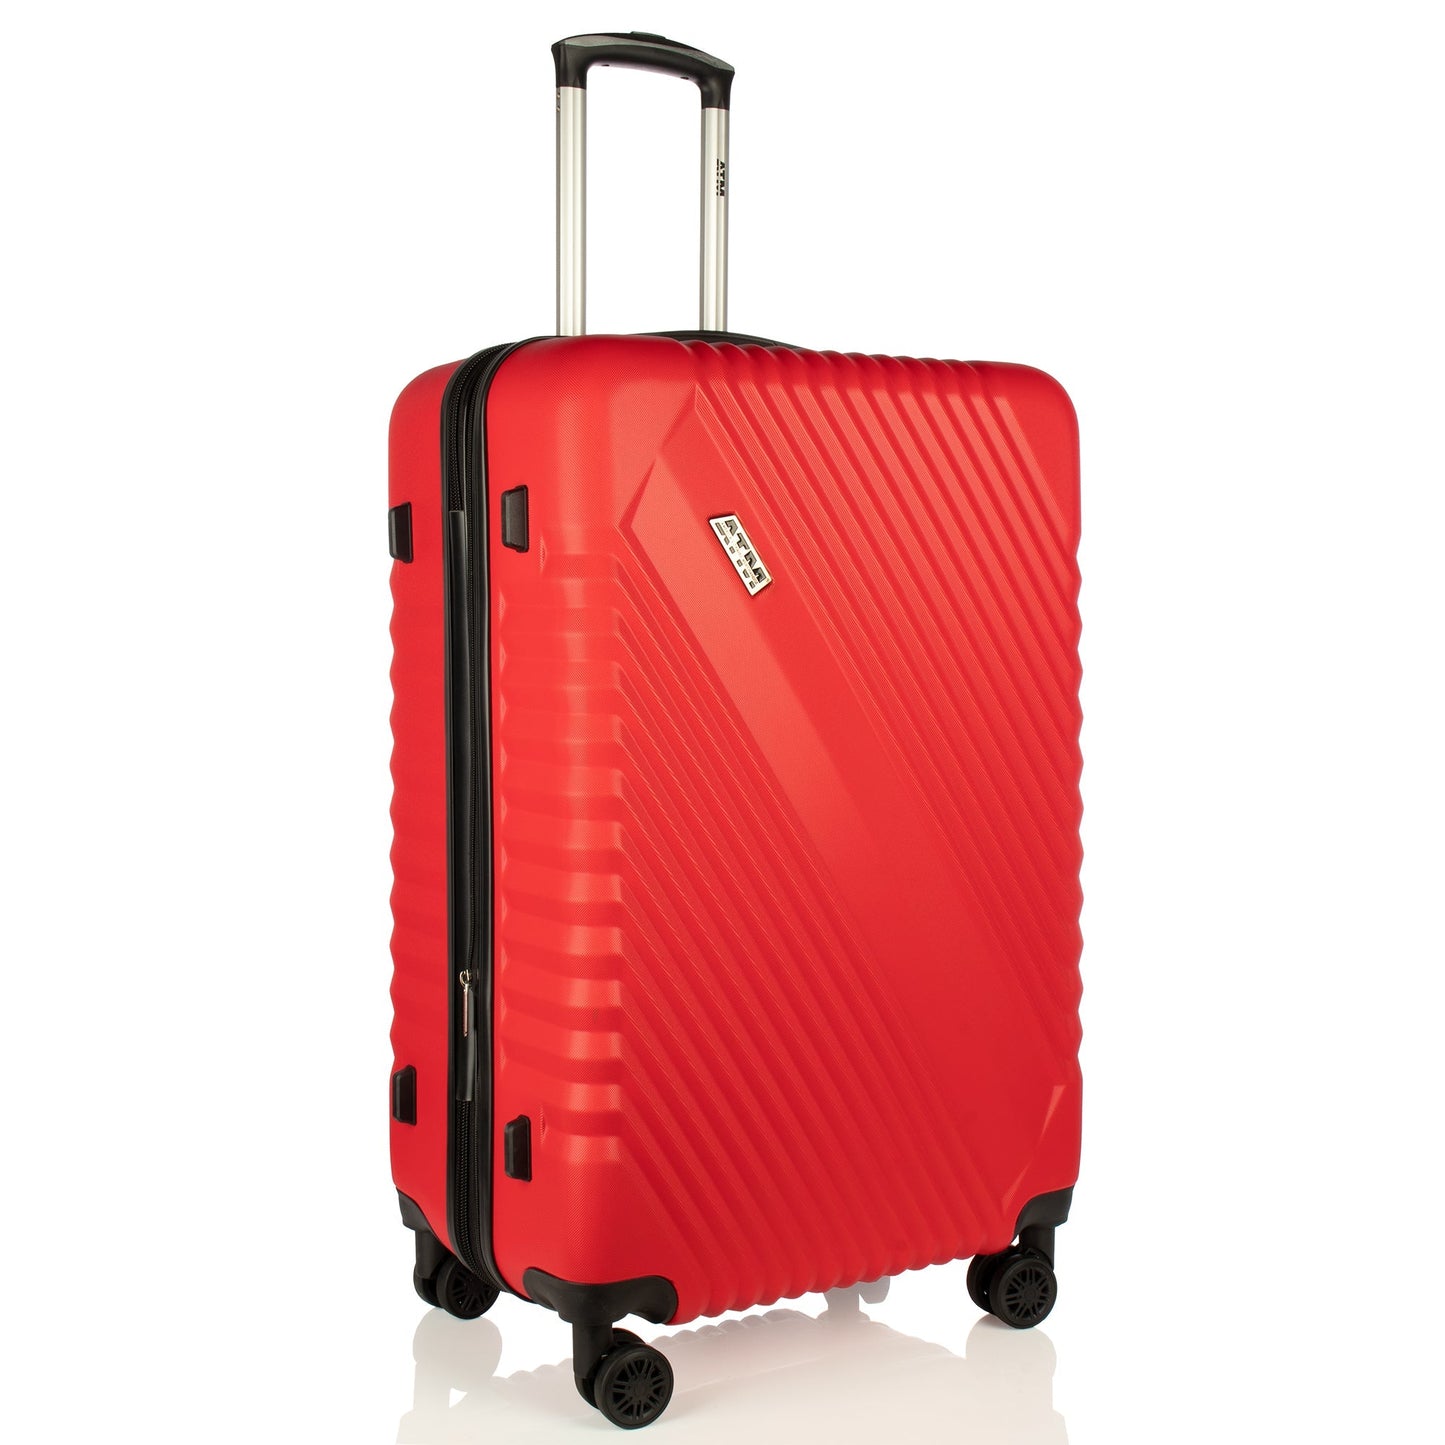 Core Collection Red Luggage 3 Piece Set (20/24/28") Suitcase Lock Spinner Hardshell